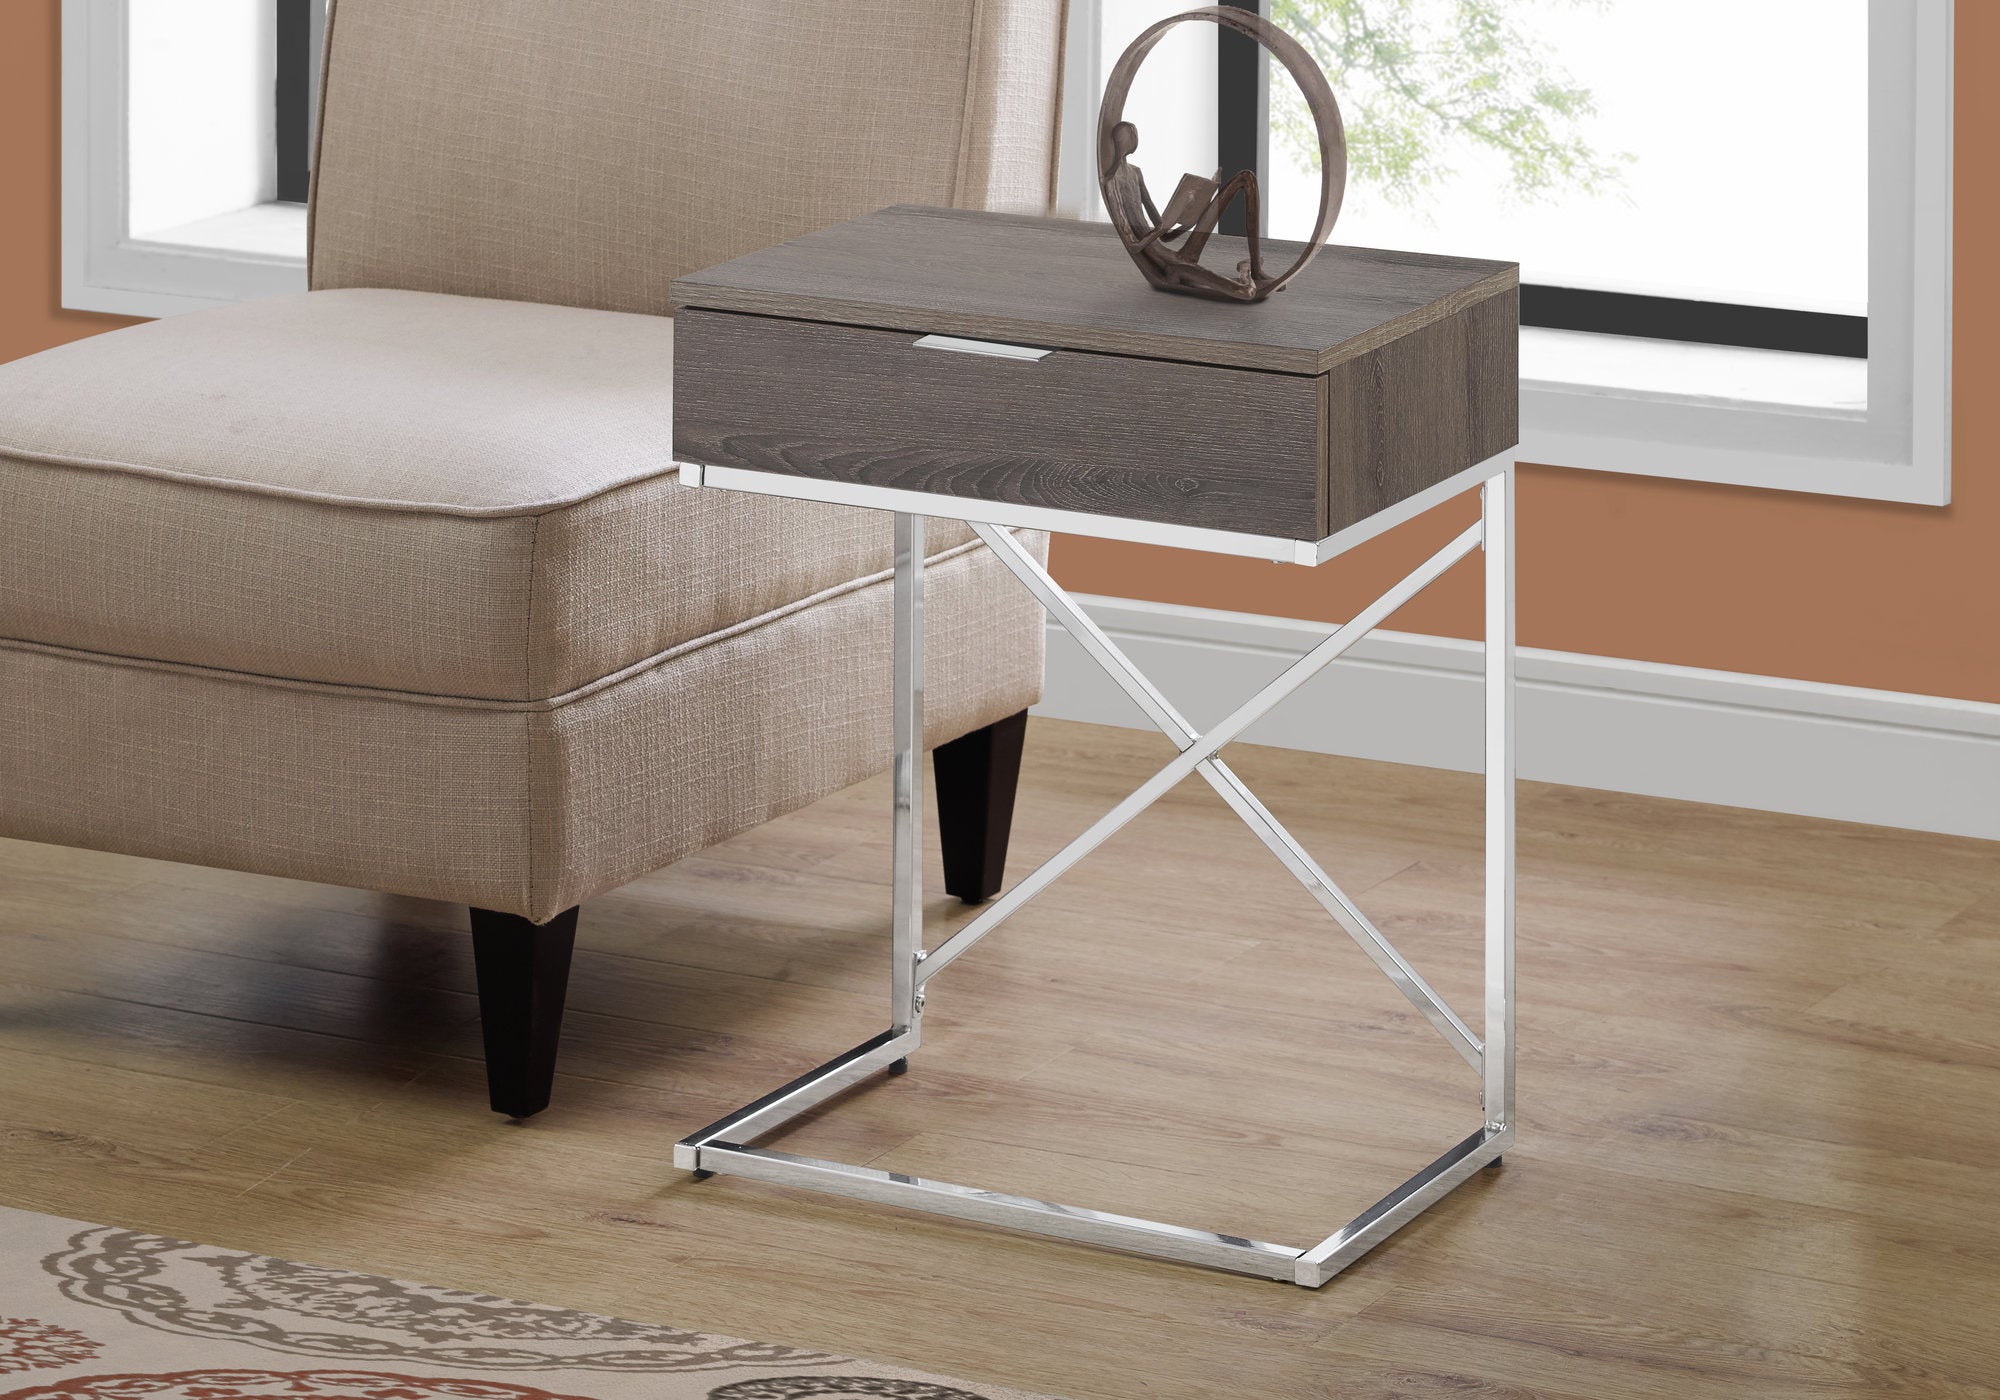 MN-843475    Accent Table, Side, End, Nightstand, Lamp, Living Room, Bedroom, Metal Legs, Laminate, Dark Taupe, Chrome, Contemporary, Modern